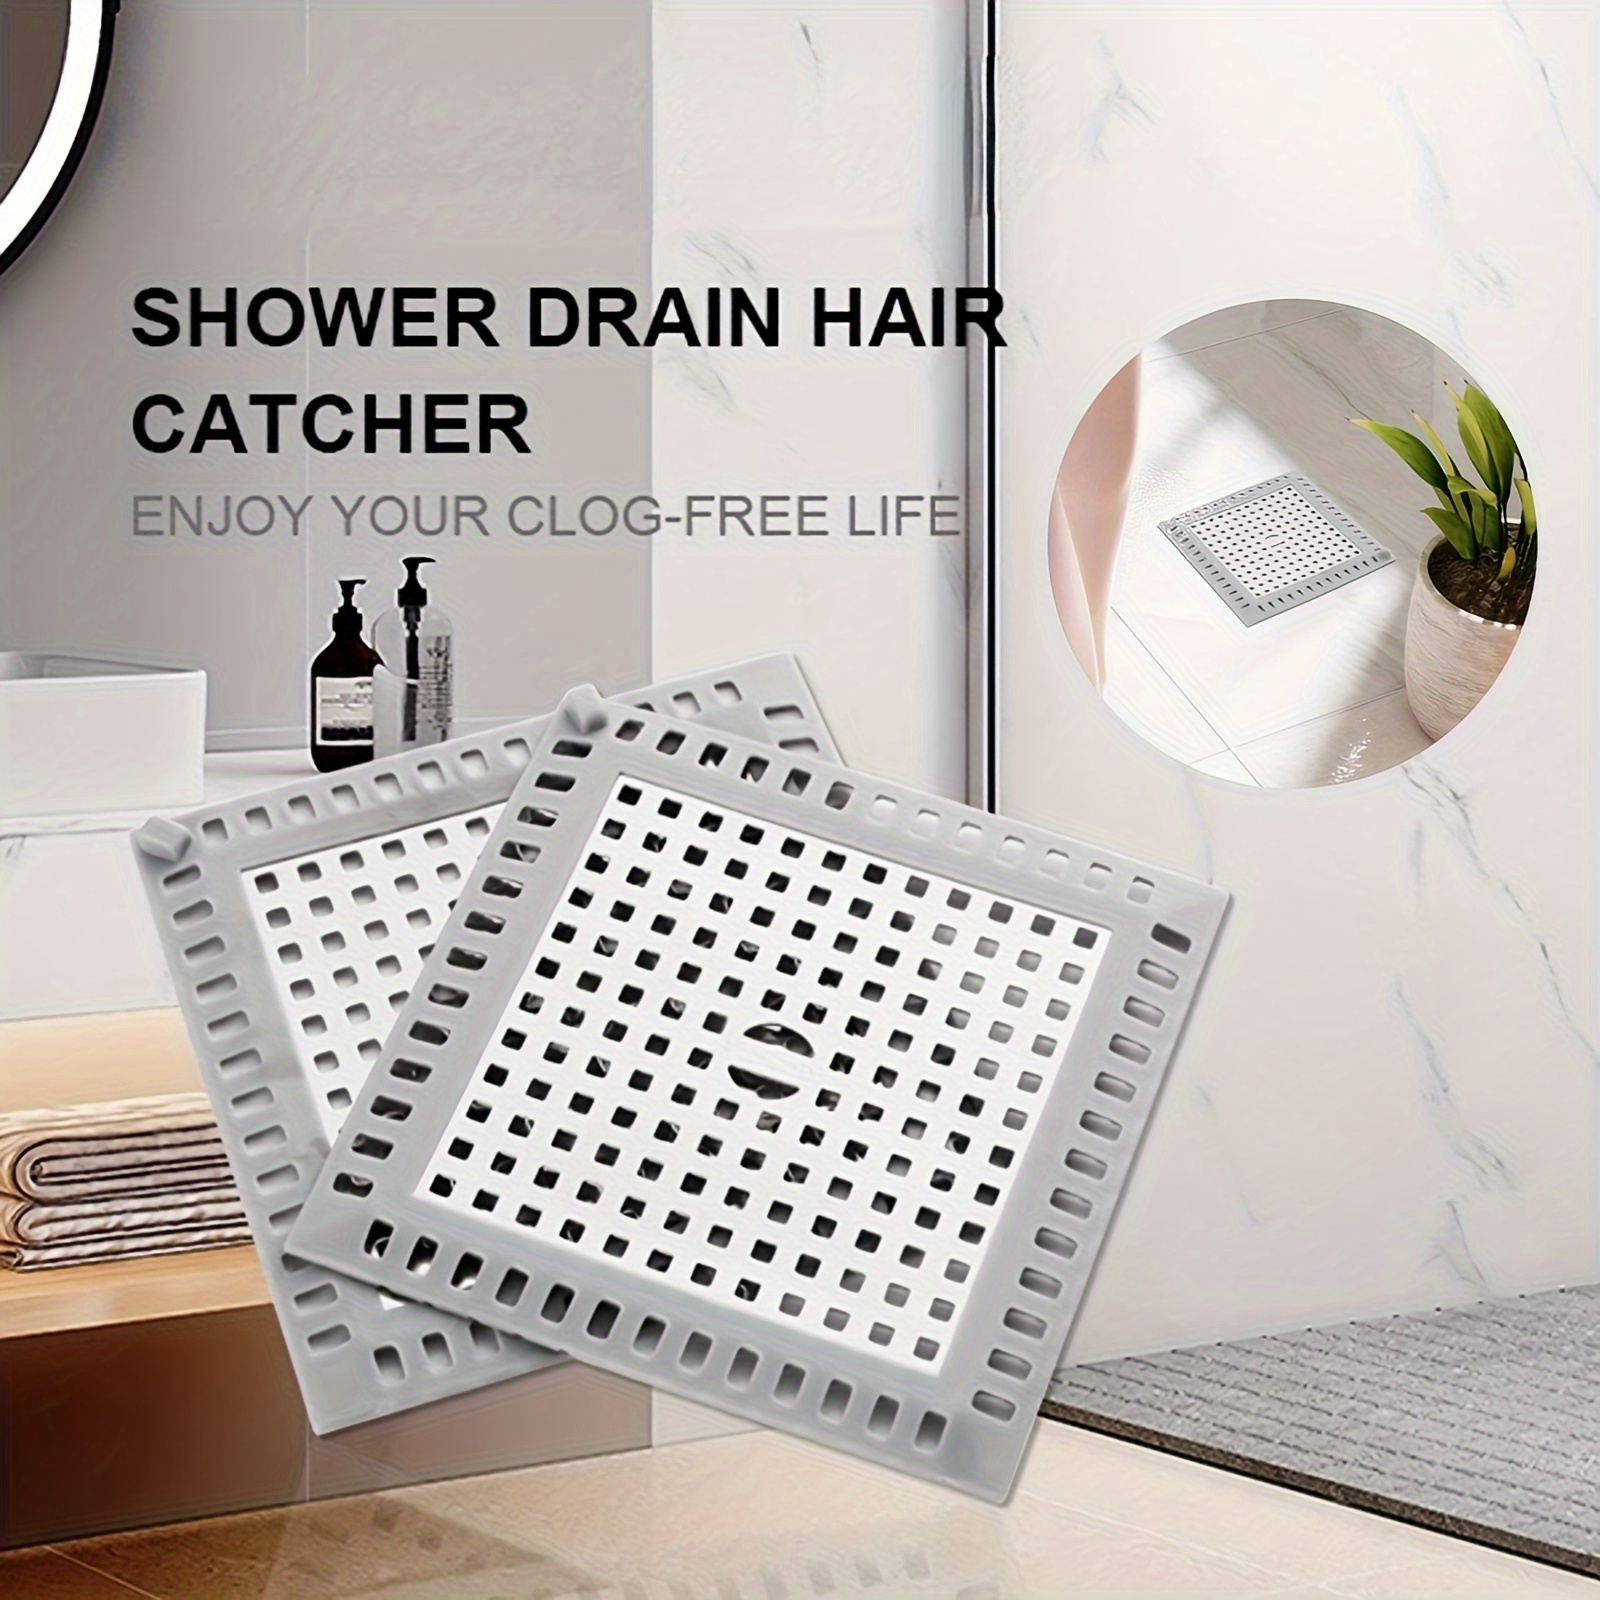 Bovinde Hair Drain Catcher,Square Drain Cover for Shower Silicone Hair  Stopper with Suction Cup,Easy to Install Suit for Bathroom,Batht